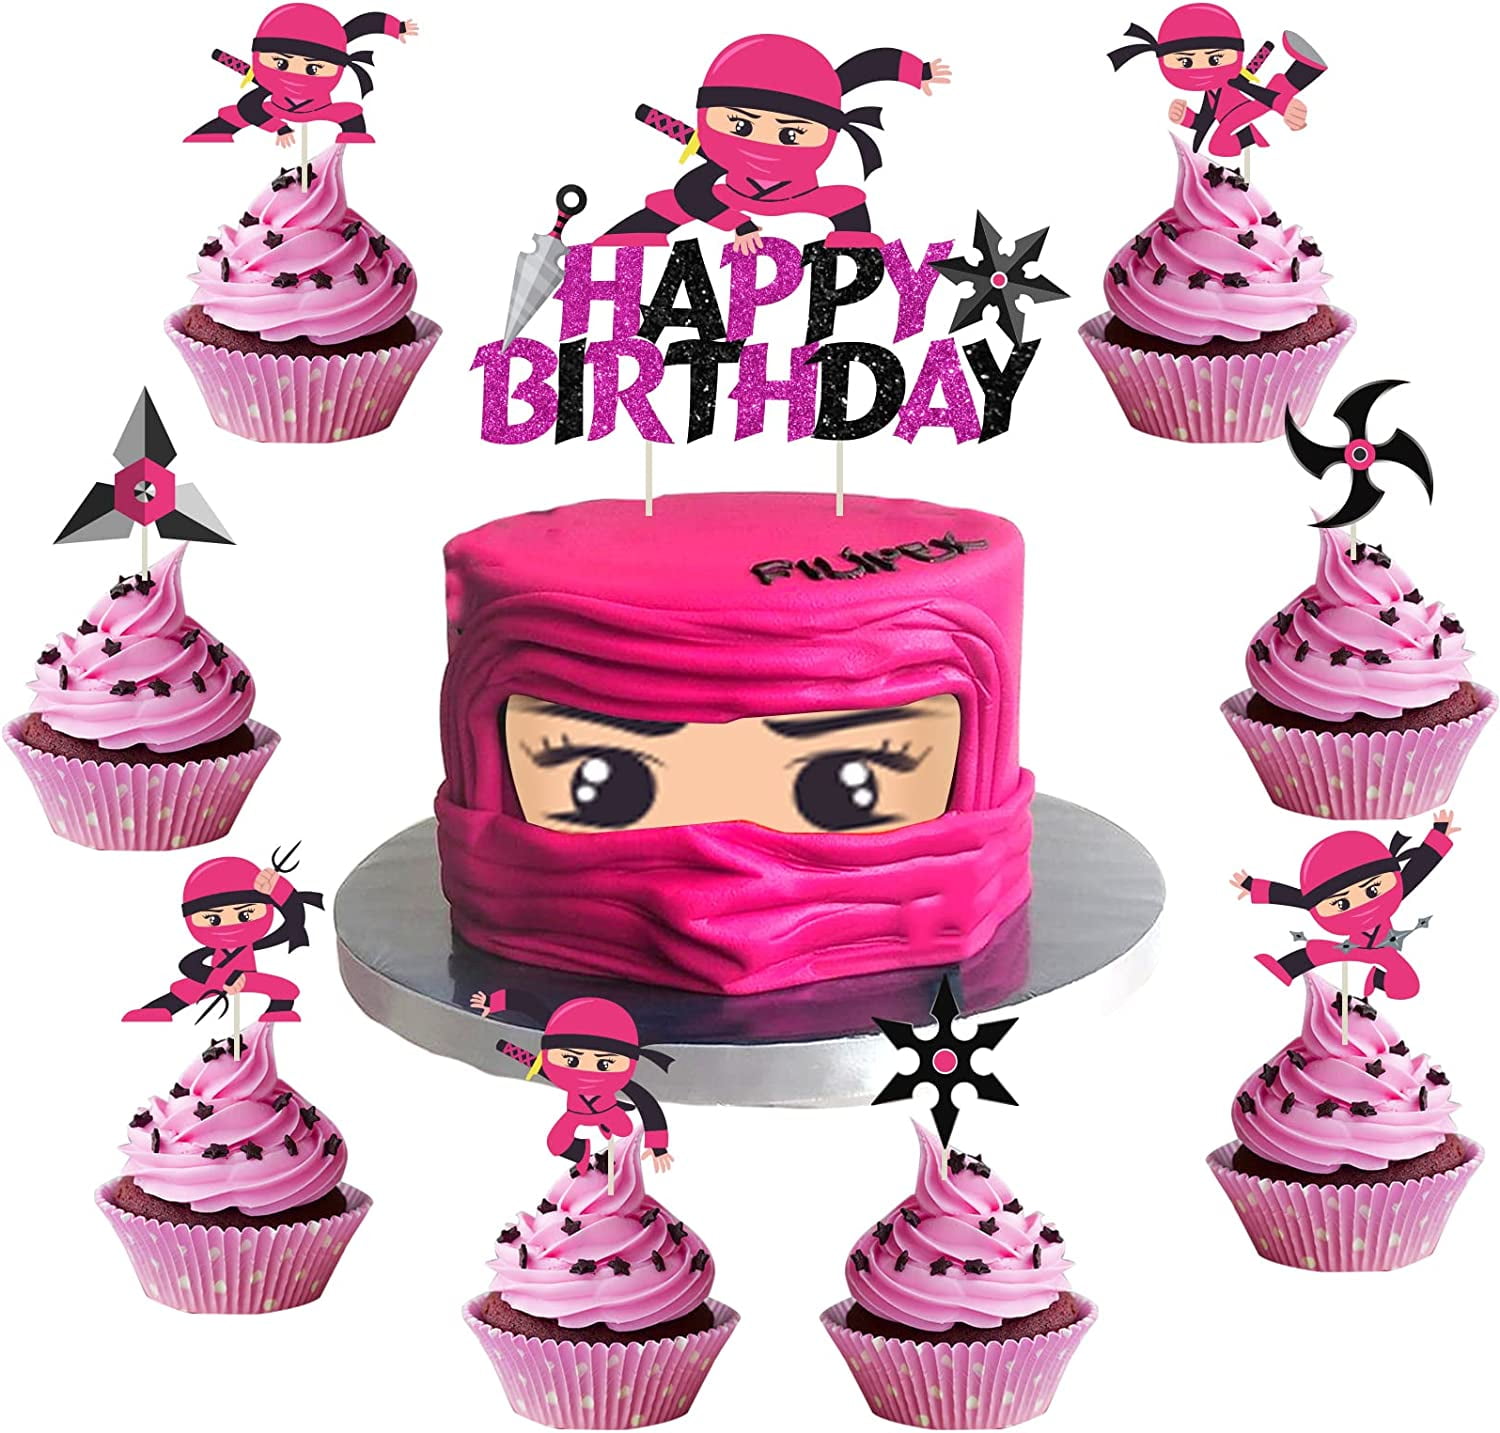 Happy Birthday Cake Topper Set Pink Black Halloween Themed Cupcake Toppers  for Girl Birthday Party Decorations with Pumpkin Ghost Spider Web  Decor-25PCs - Walmart.com